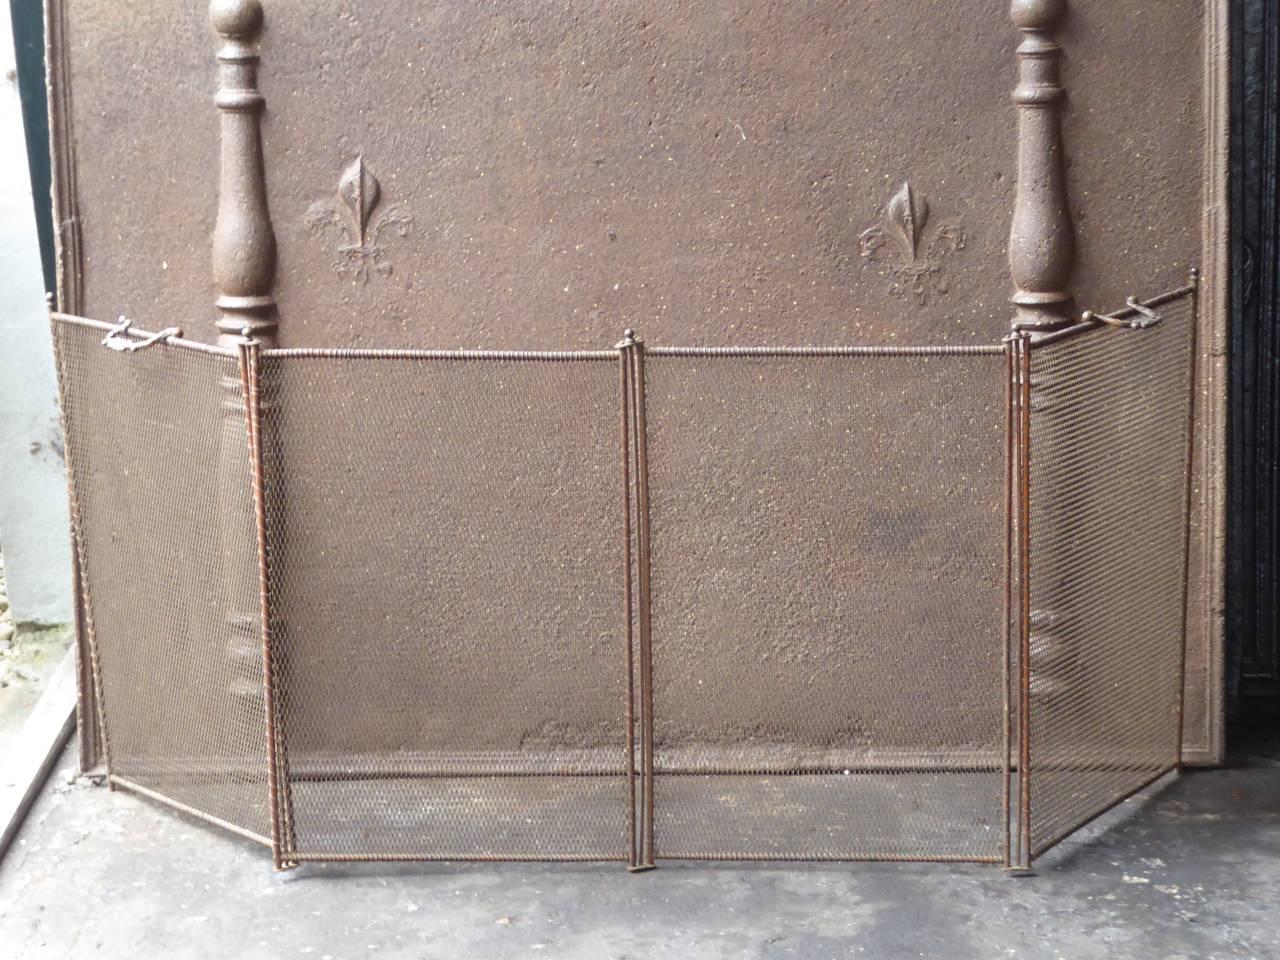 19th century, French fireplace screen made of iron and iron mesh.

We have a unique and specialized collection of antique and used fireplace accessories consisting of more than 1000 listings at 1stdibs. Amongst others, we always have 300+ firebacks,